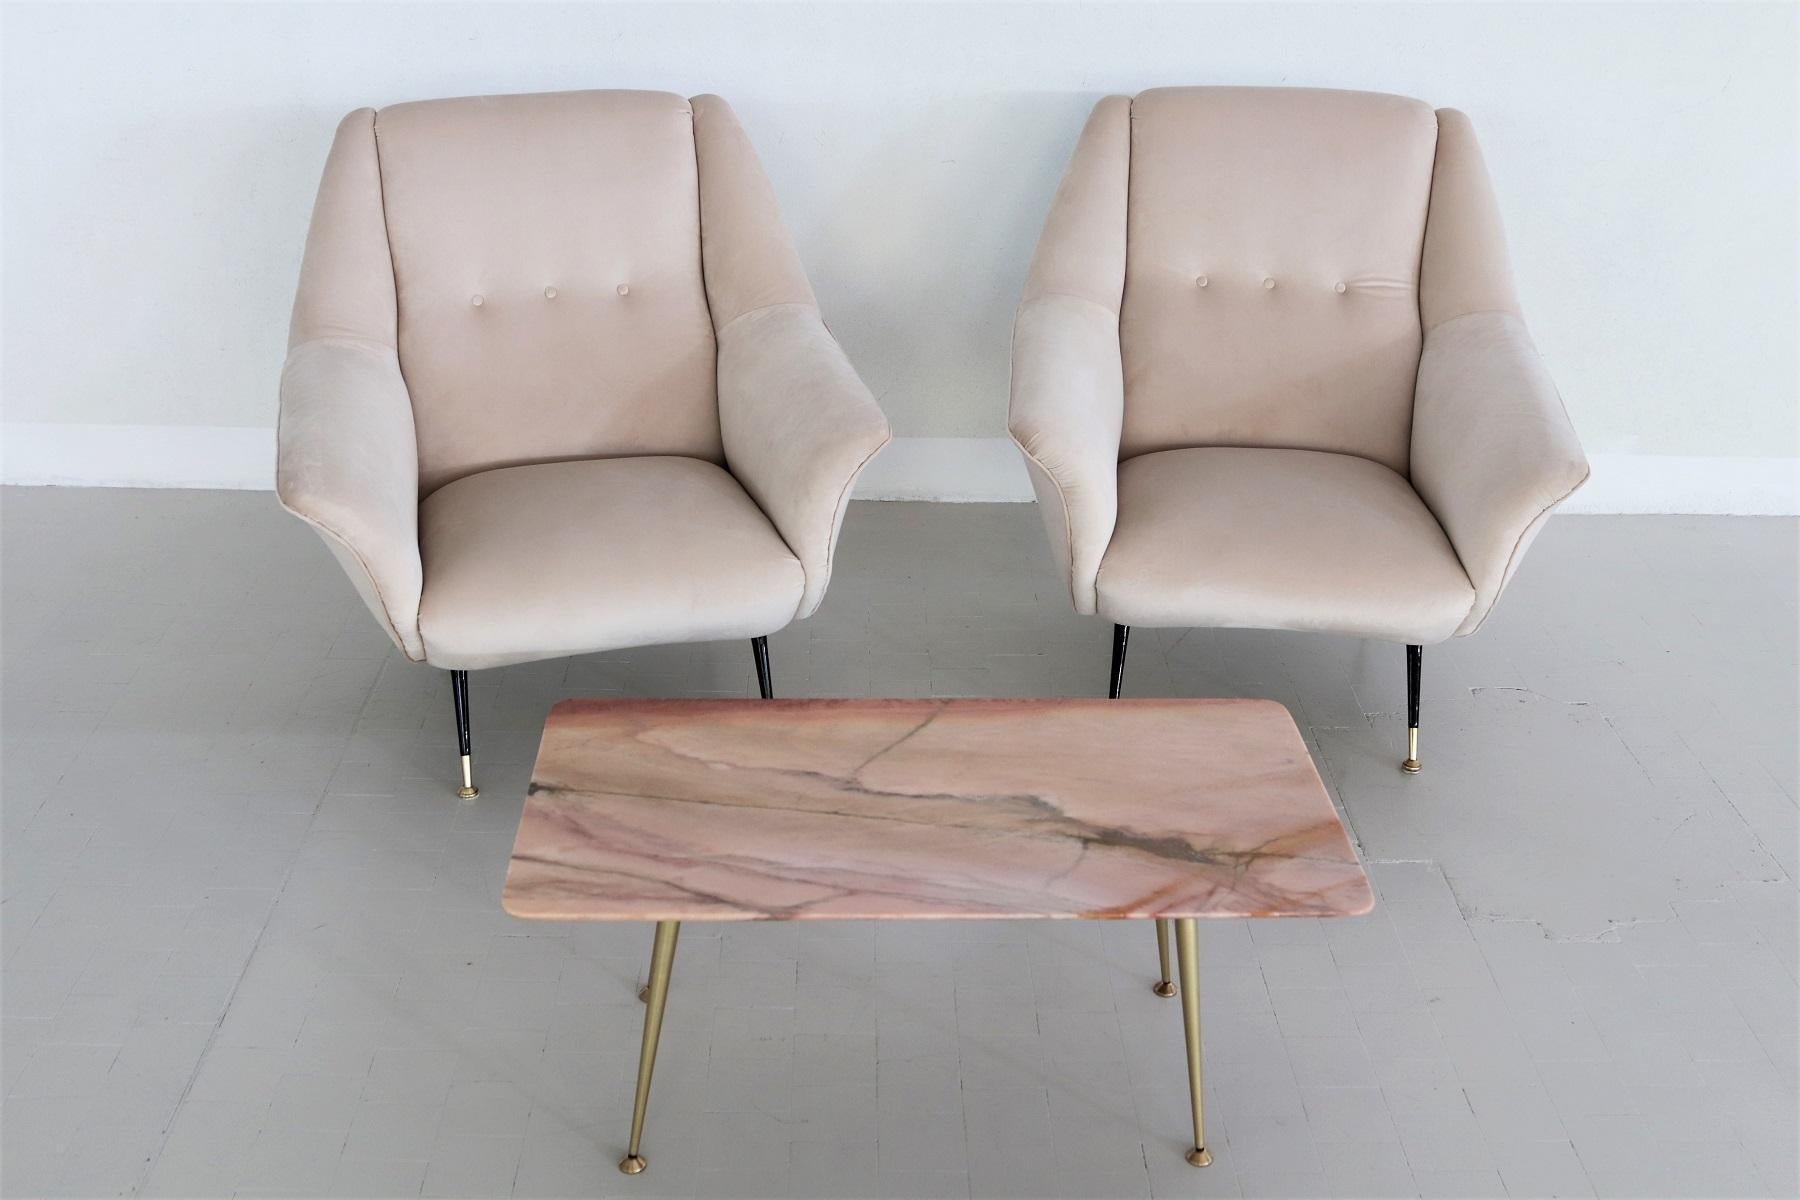 Italian Midcentury Coffee Table with Pink Marble Top and Brass Tips, 1950s For Sale 9